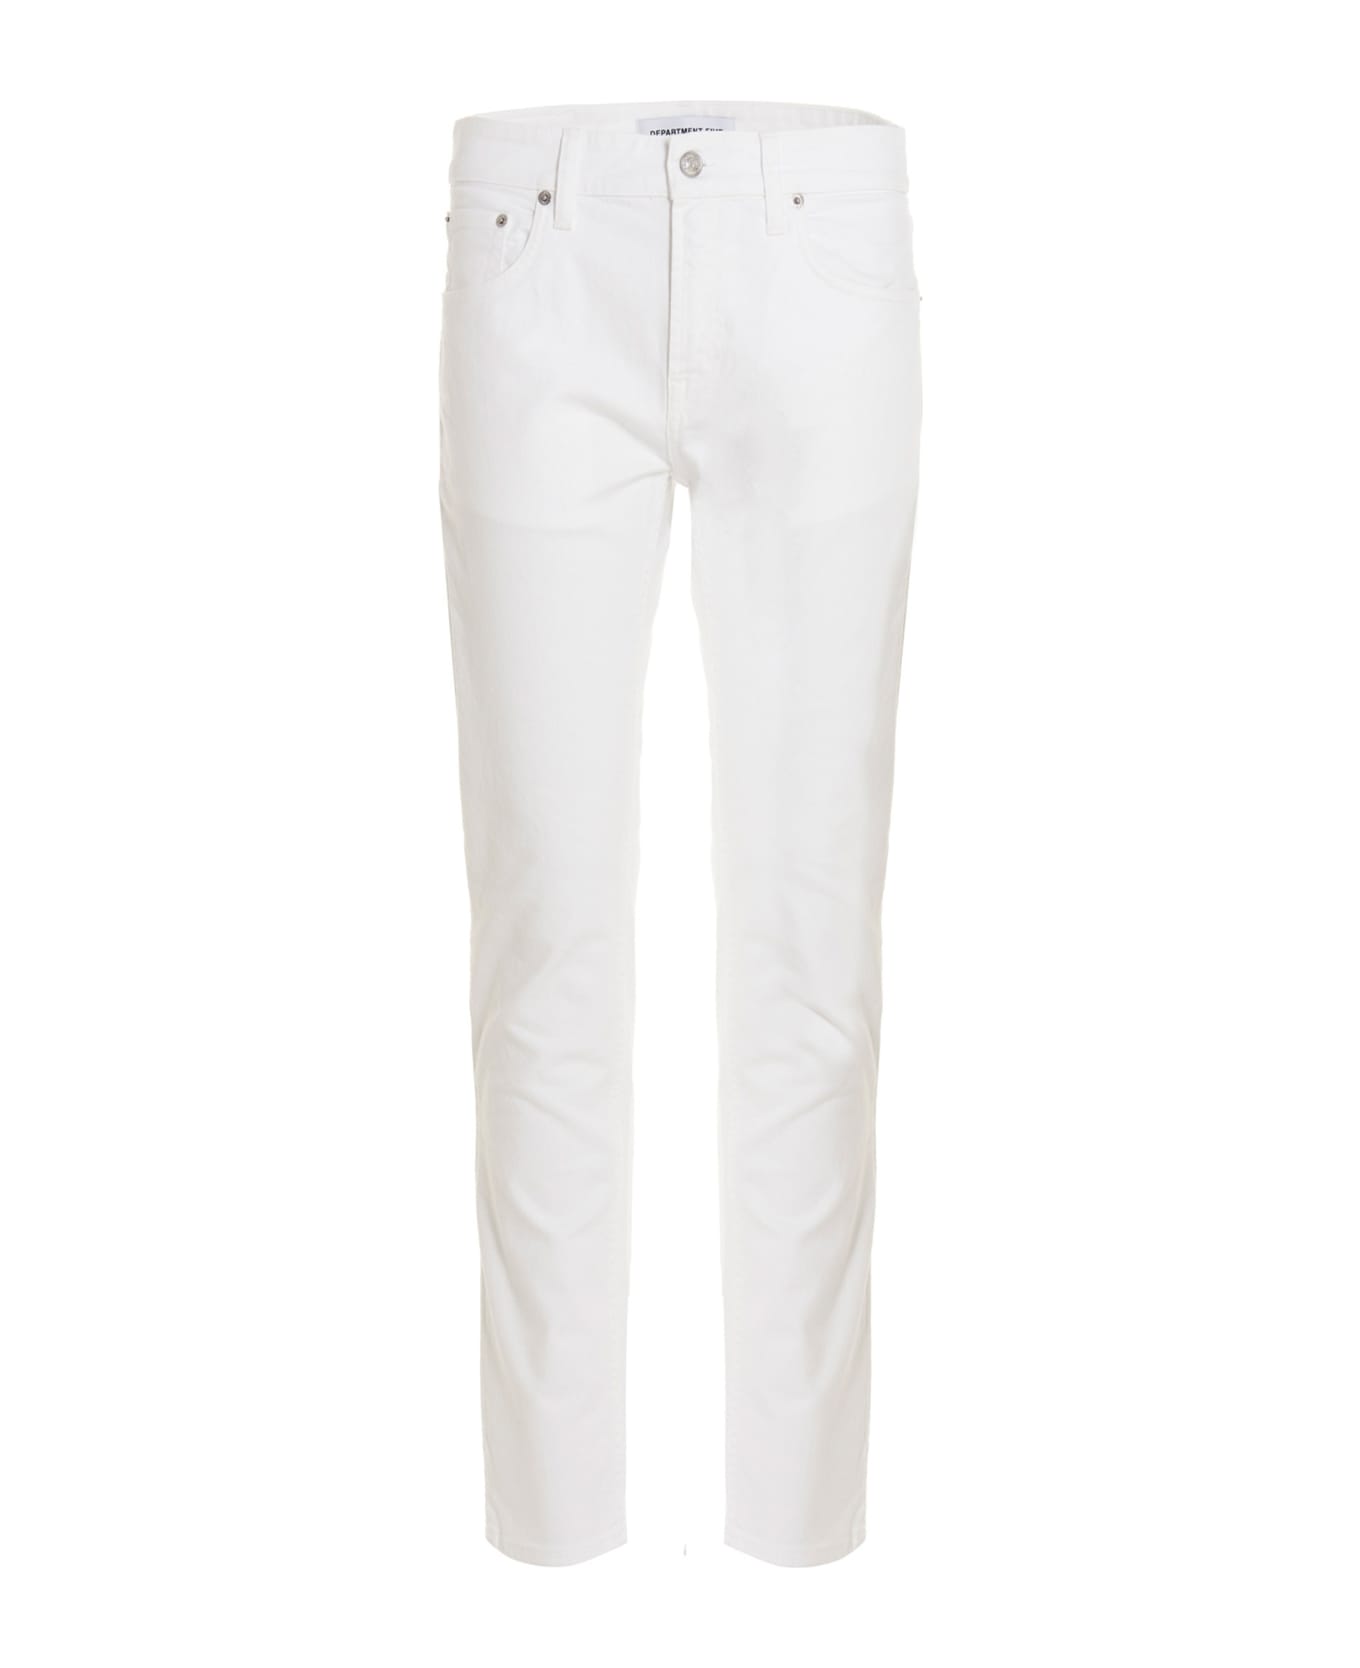 Department Five 'skeith' Jeans - White